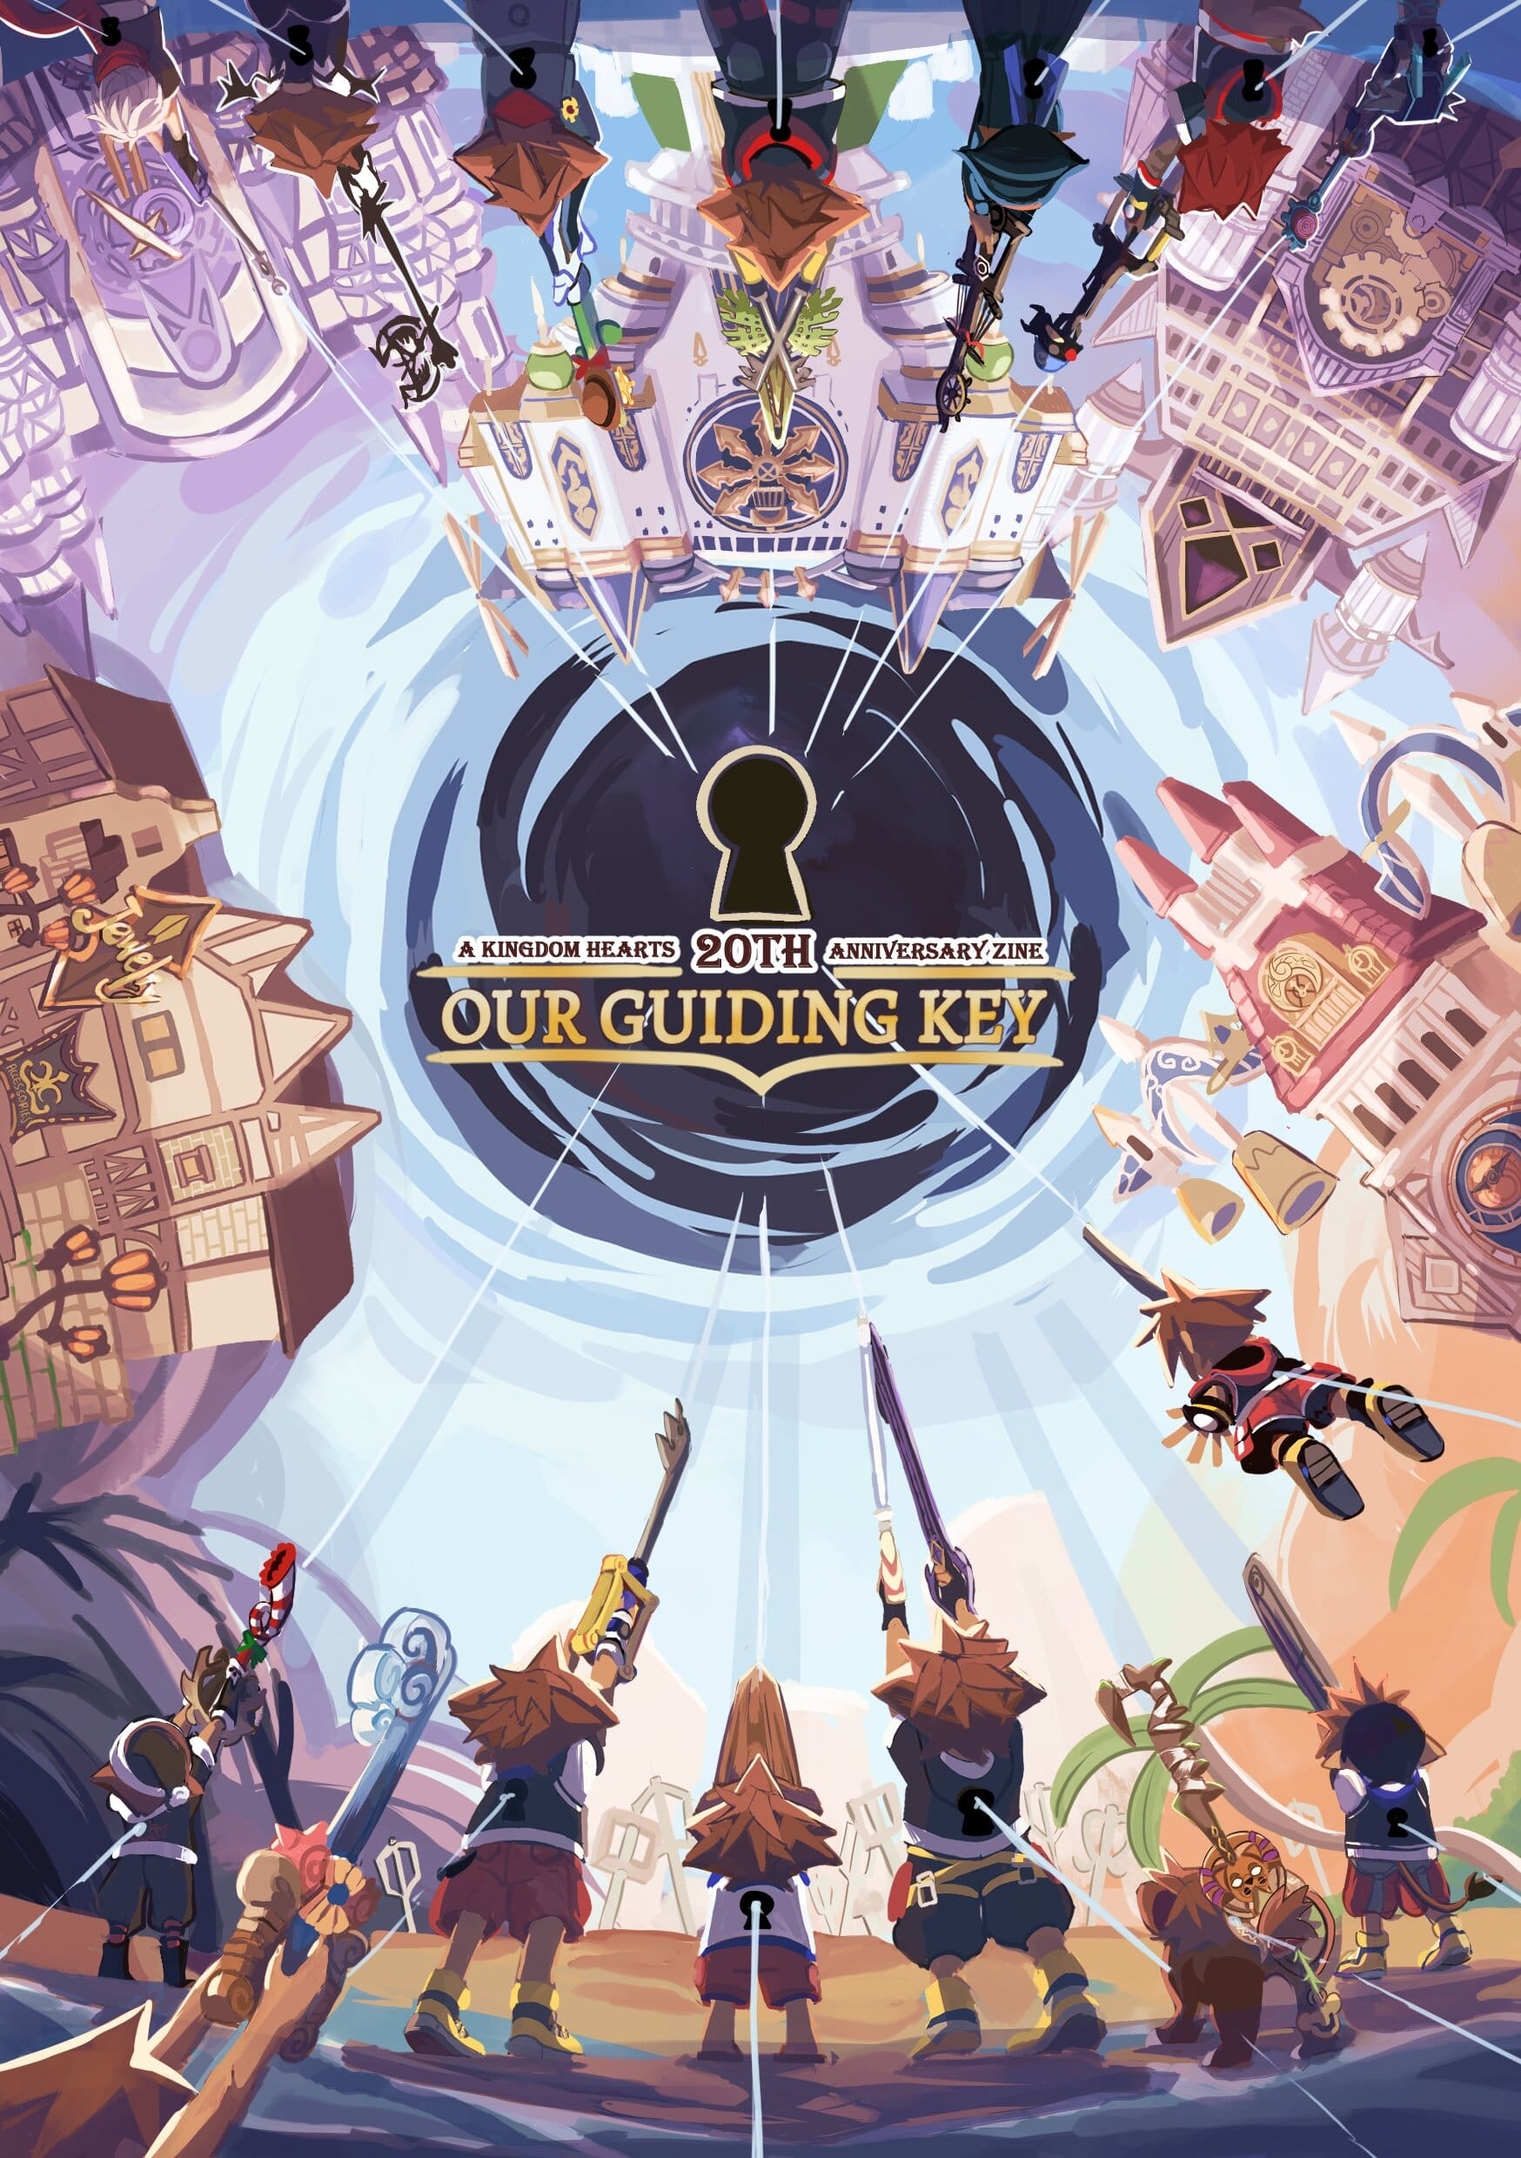 Our Guiding Key: A Kingdom Hearts 20th Anniversary Zine by